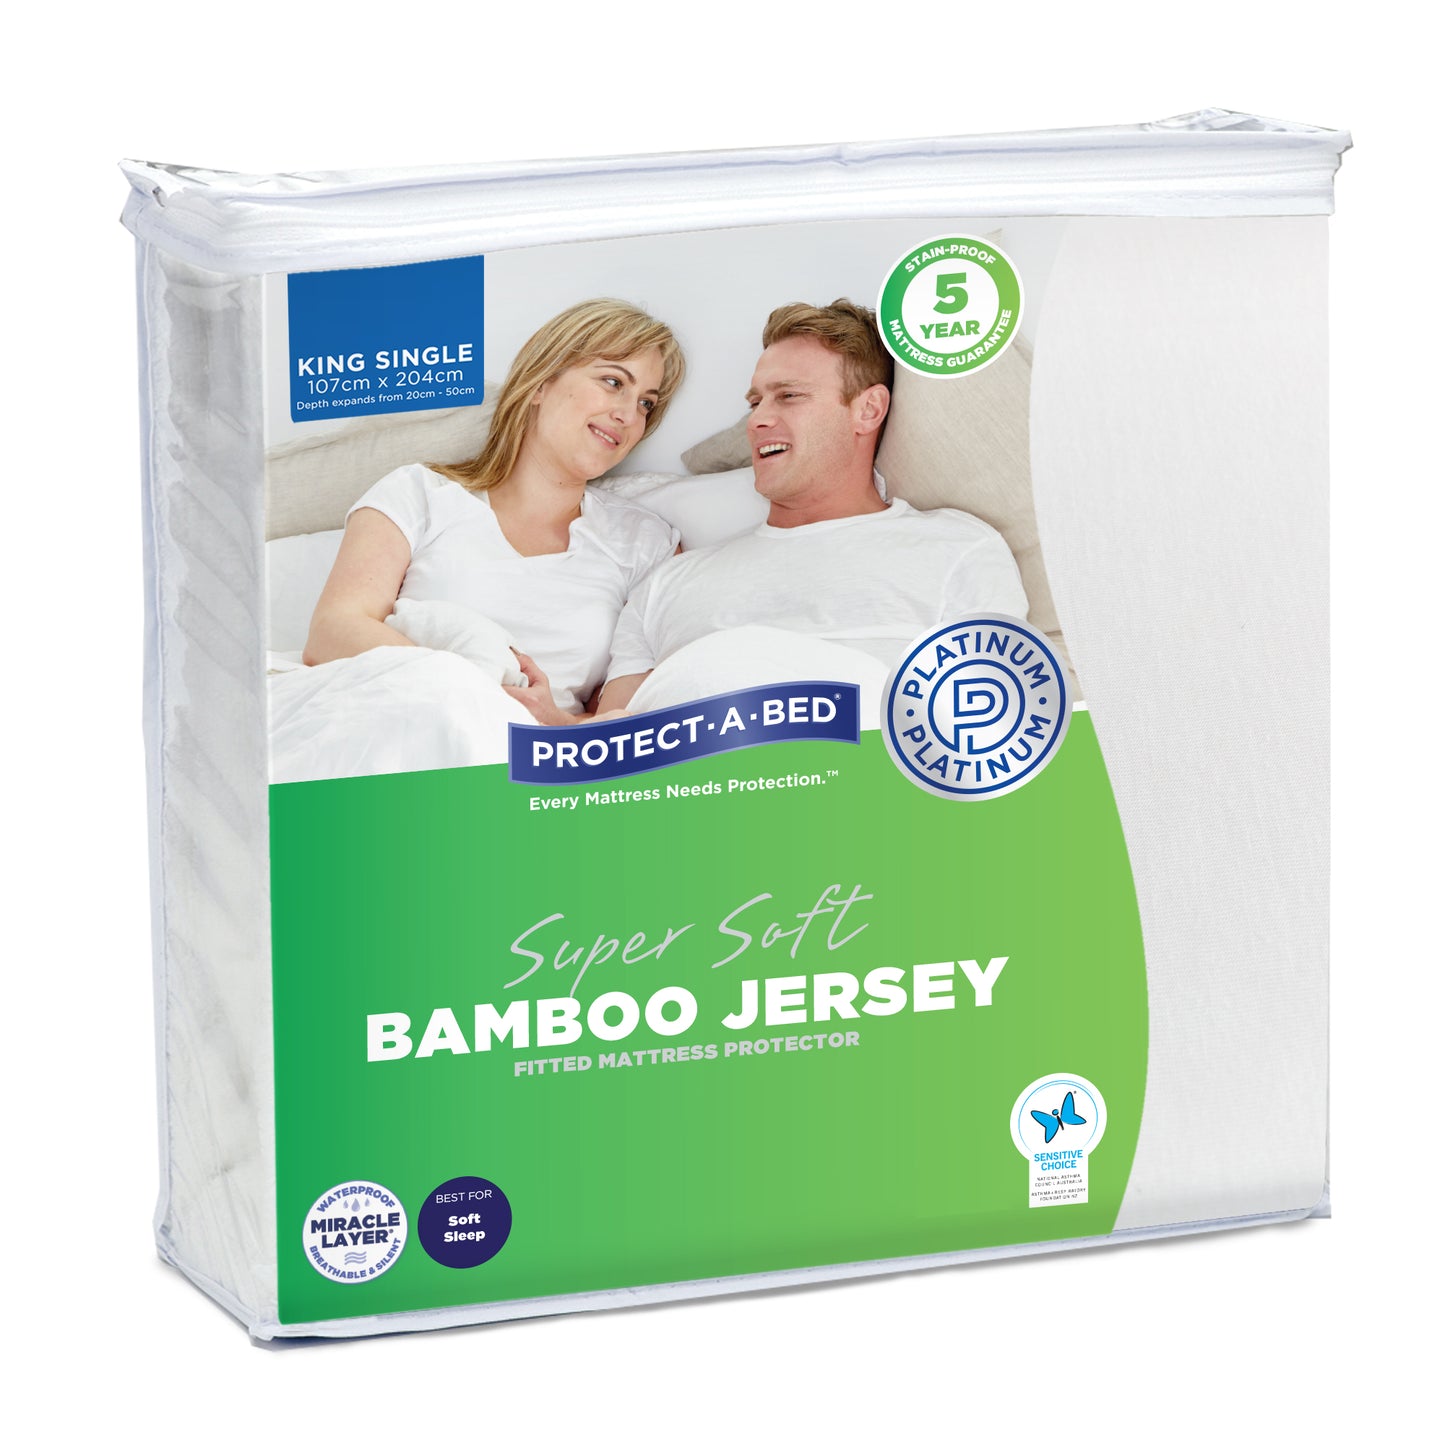 protectabedbamboojerseyfittedwaterproof-king-single